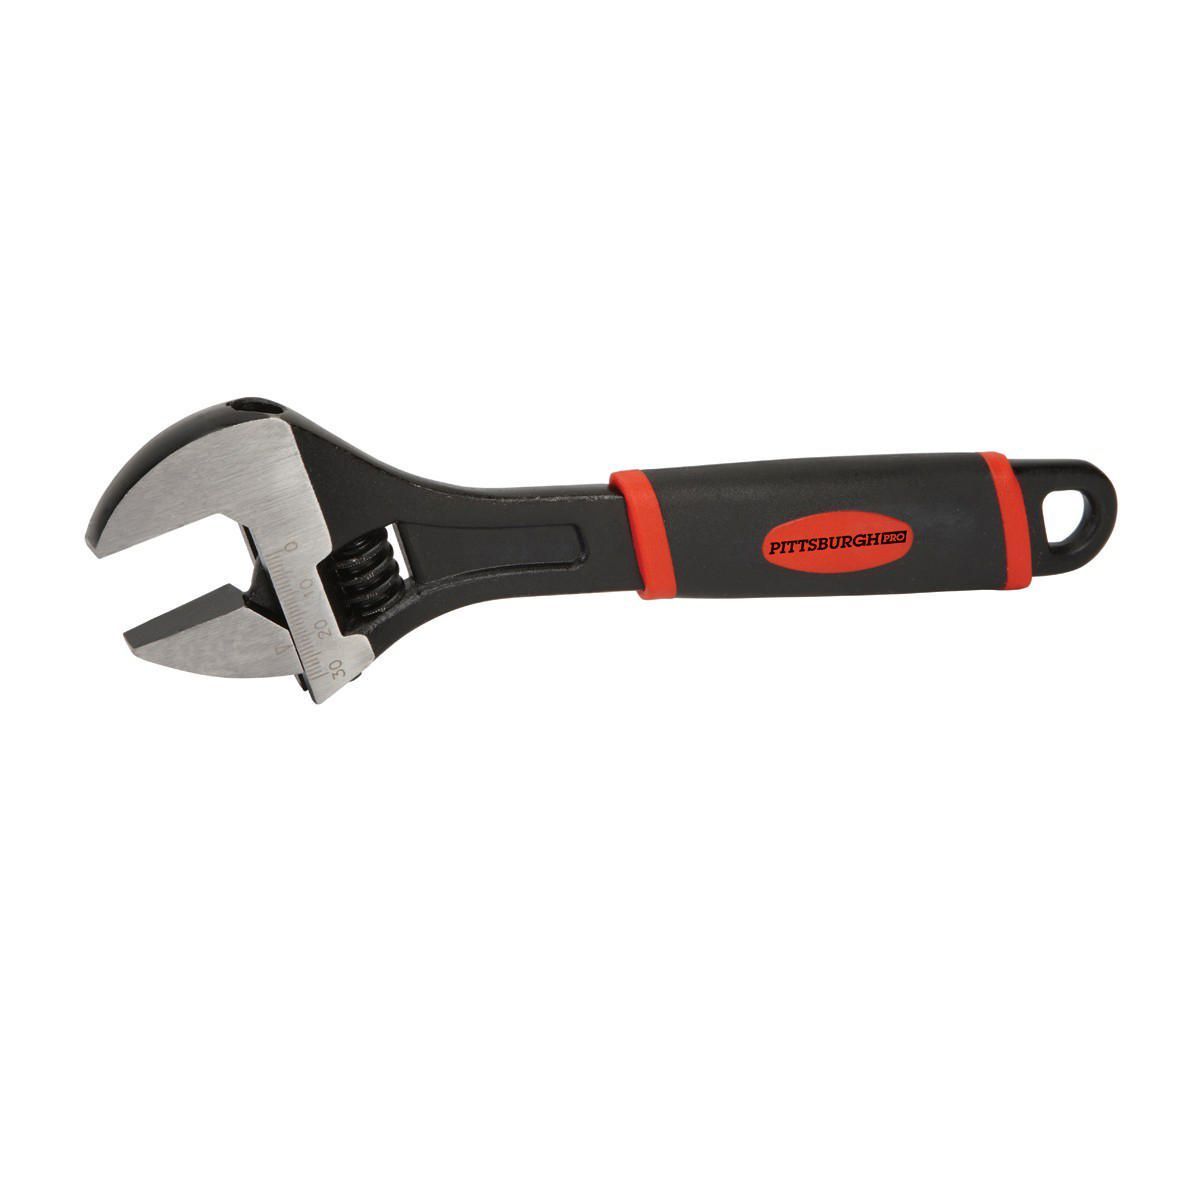 PITTSBURGH PRO 10 in. Adjustable Wrench